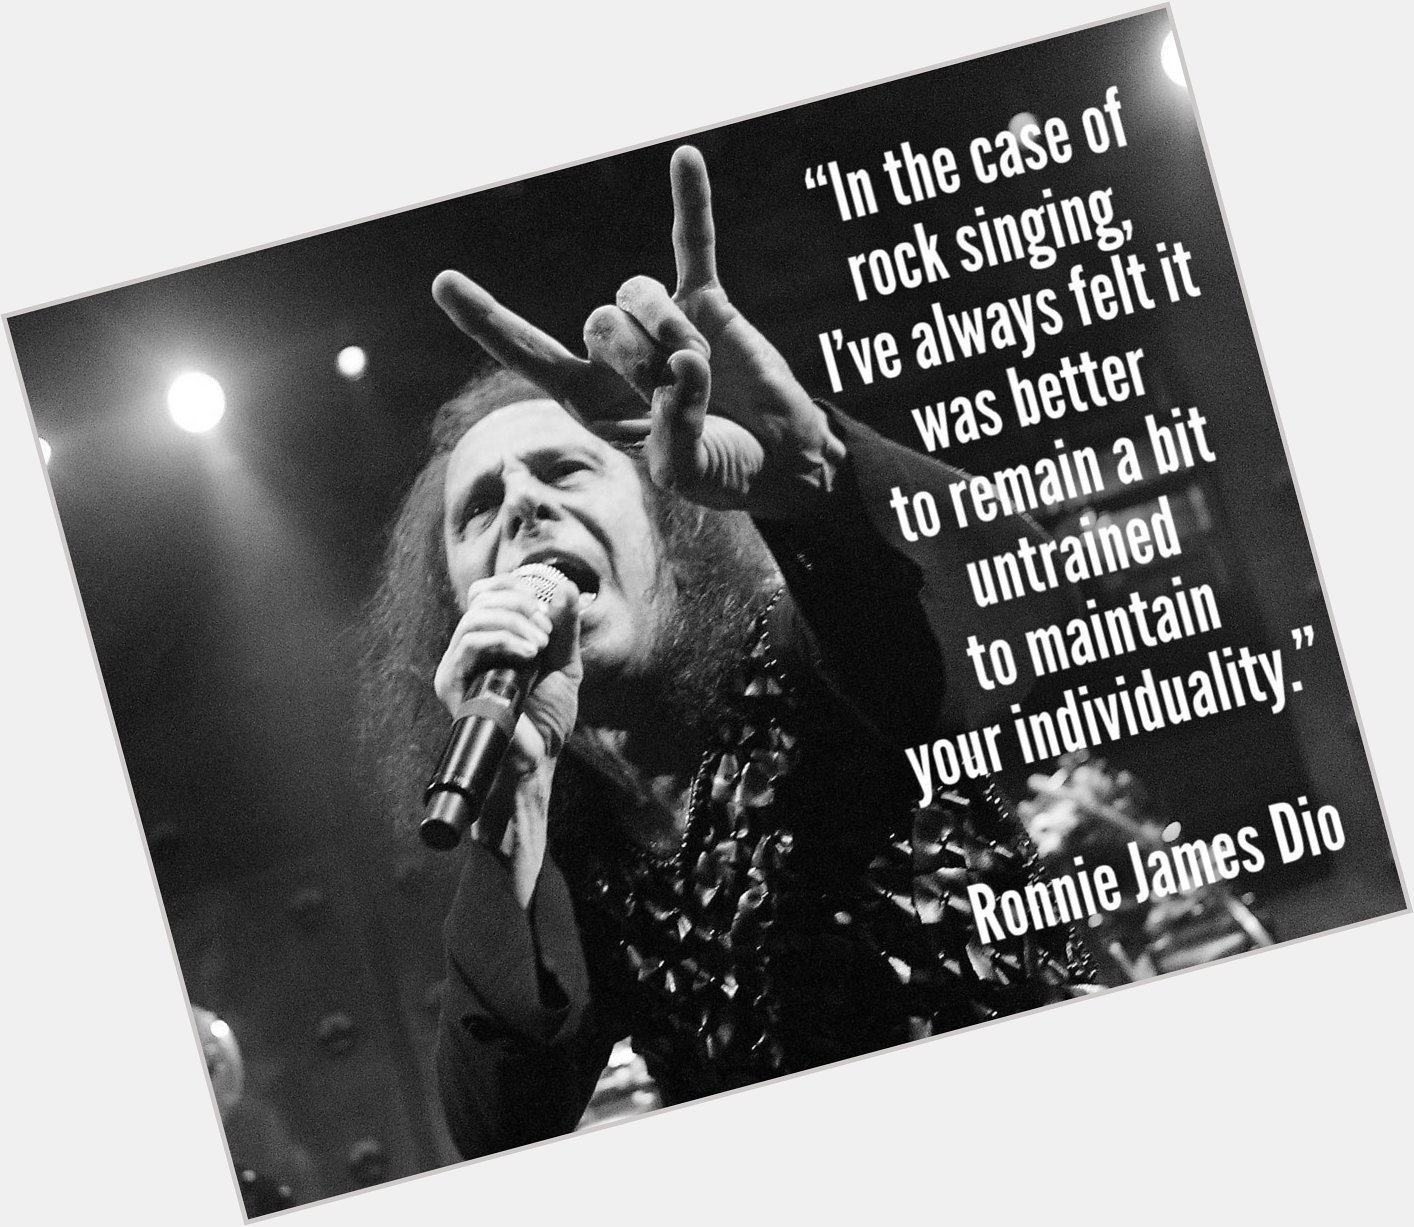 Happy Birthday, Ronnie James Dio, wherever you are...     